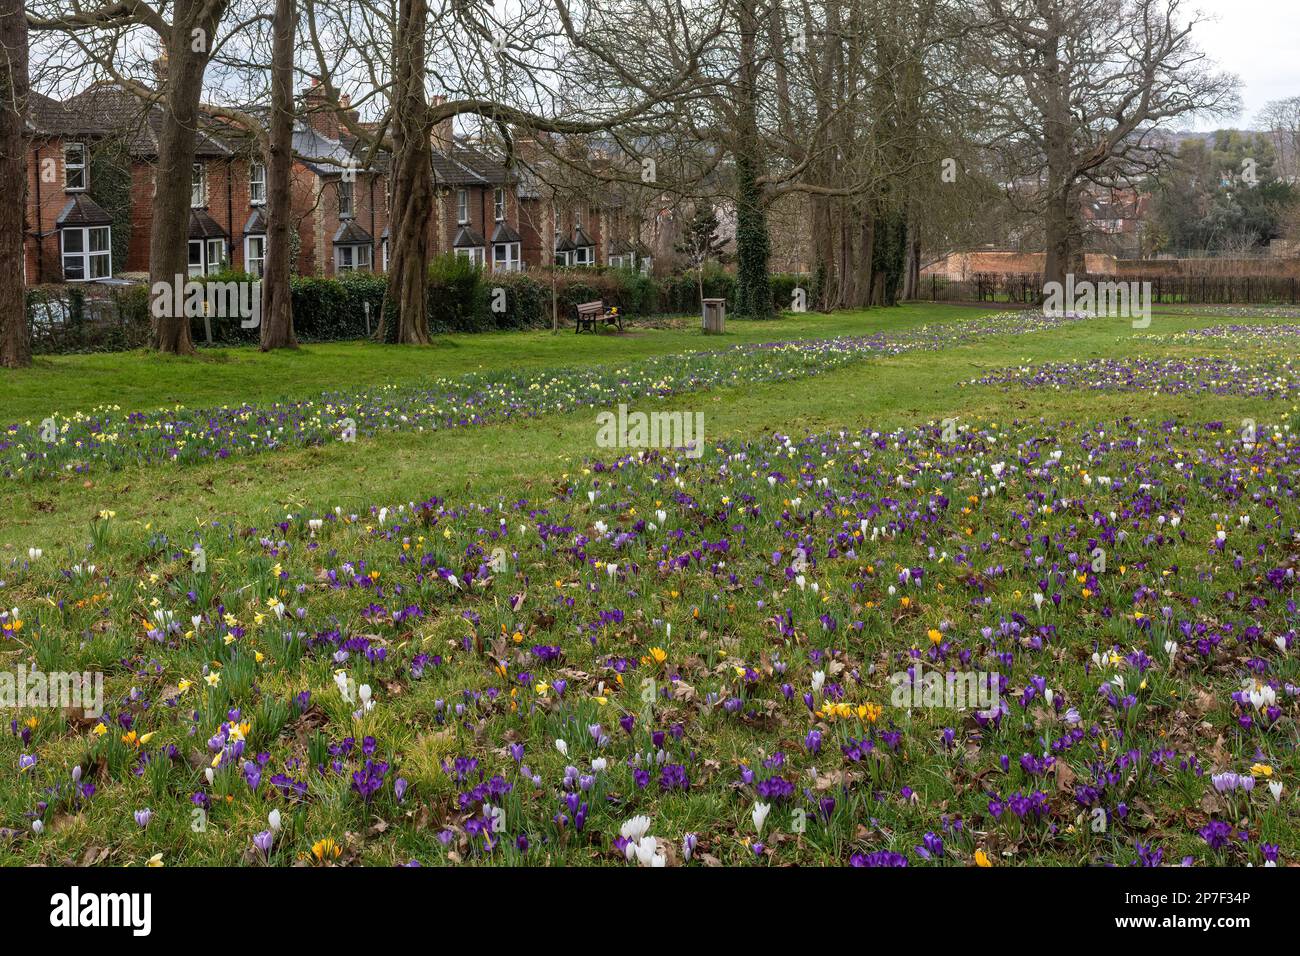 Crocuses and daffodils, spring flowers in Stoke Park Gardens in Guildford, Surrey, England, UK during March Stock Photo